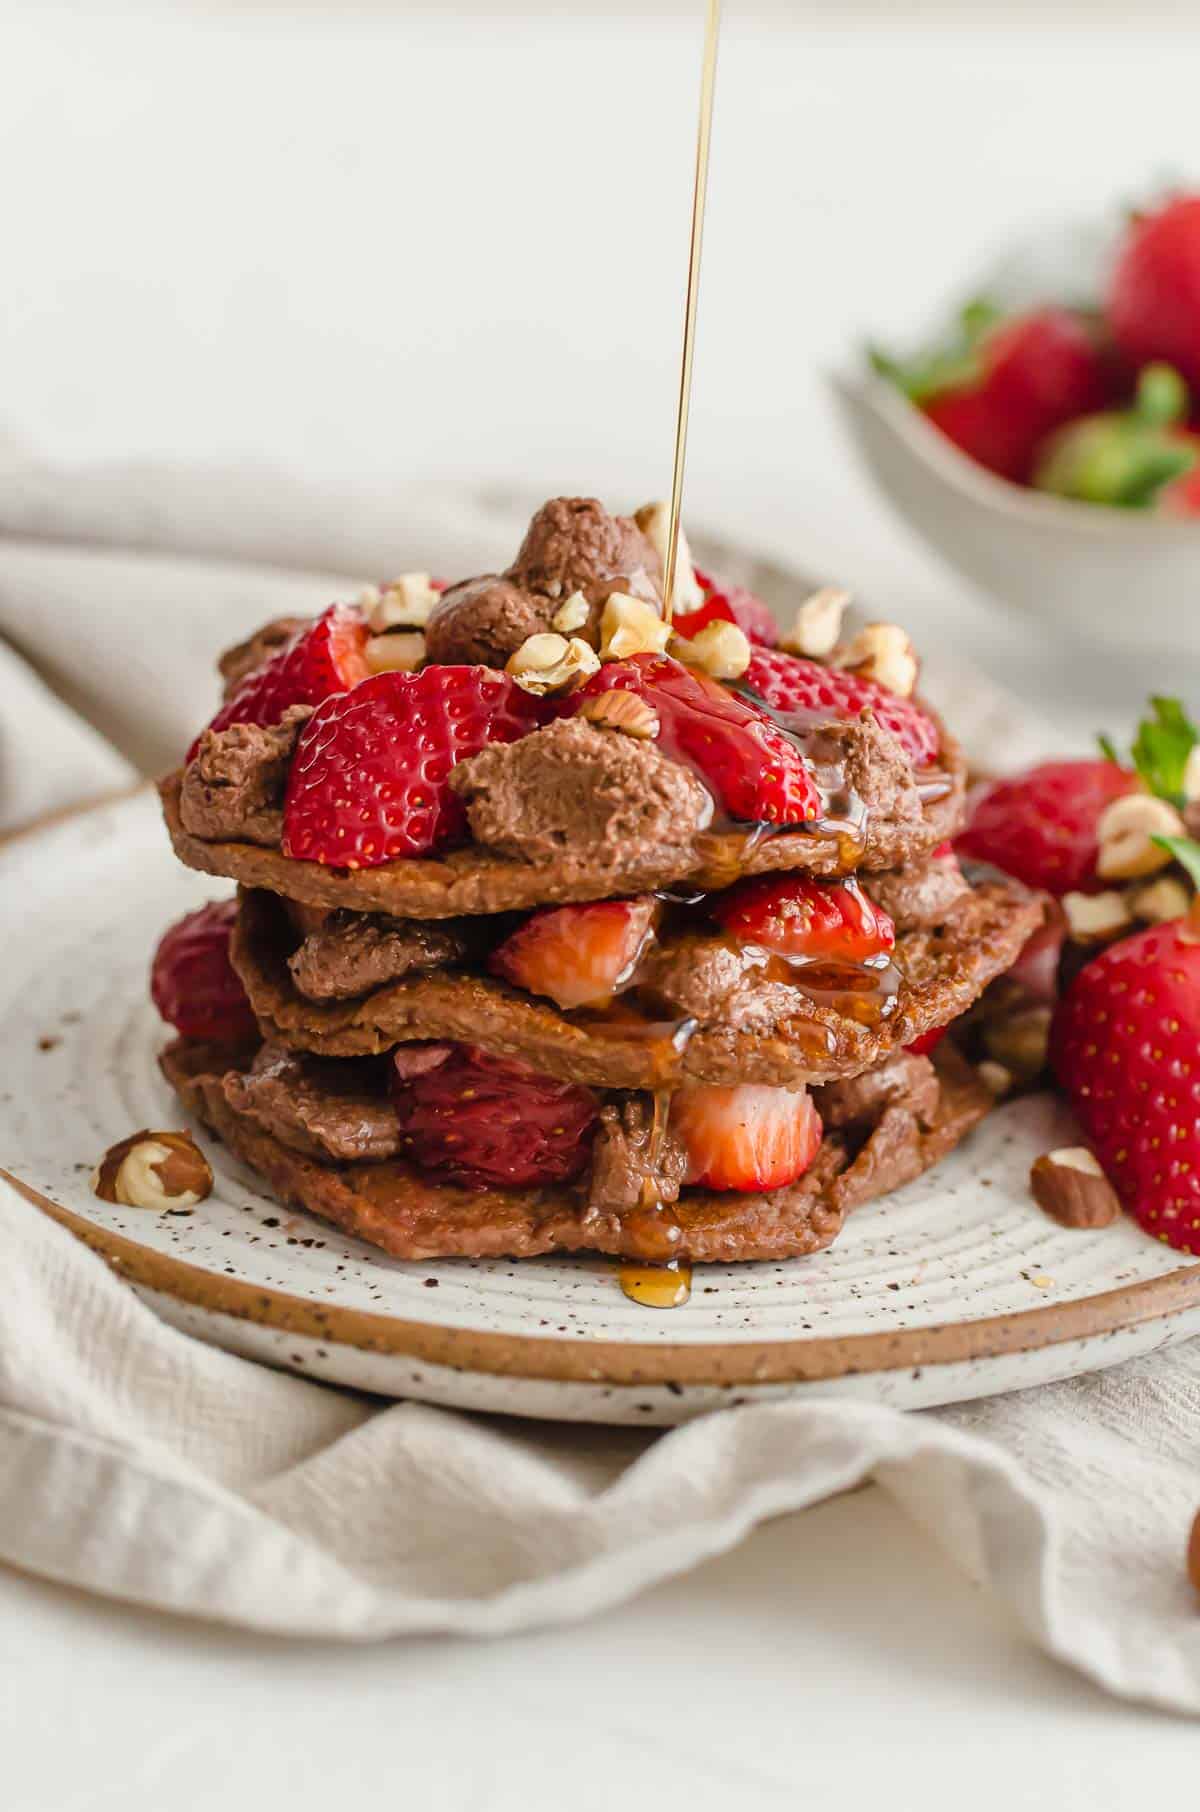 A stack of nutella pancakes with strawberries and syrup being drizzled on.